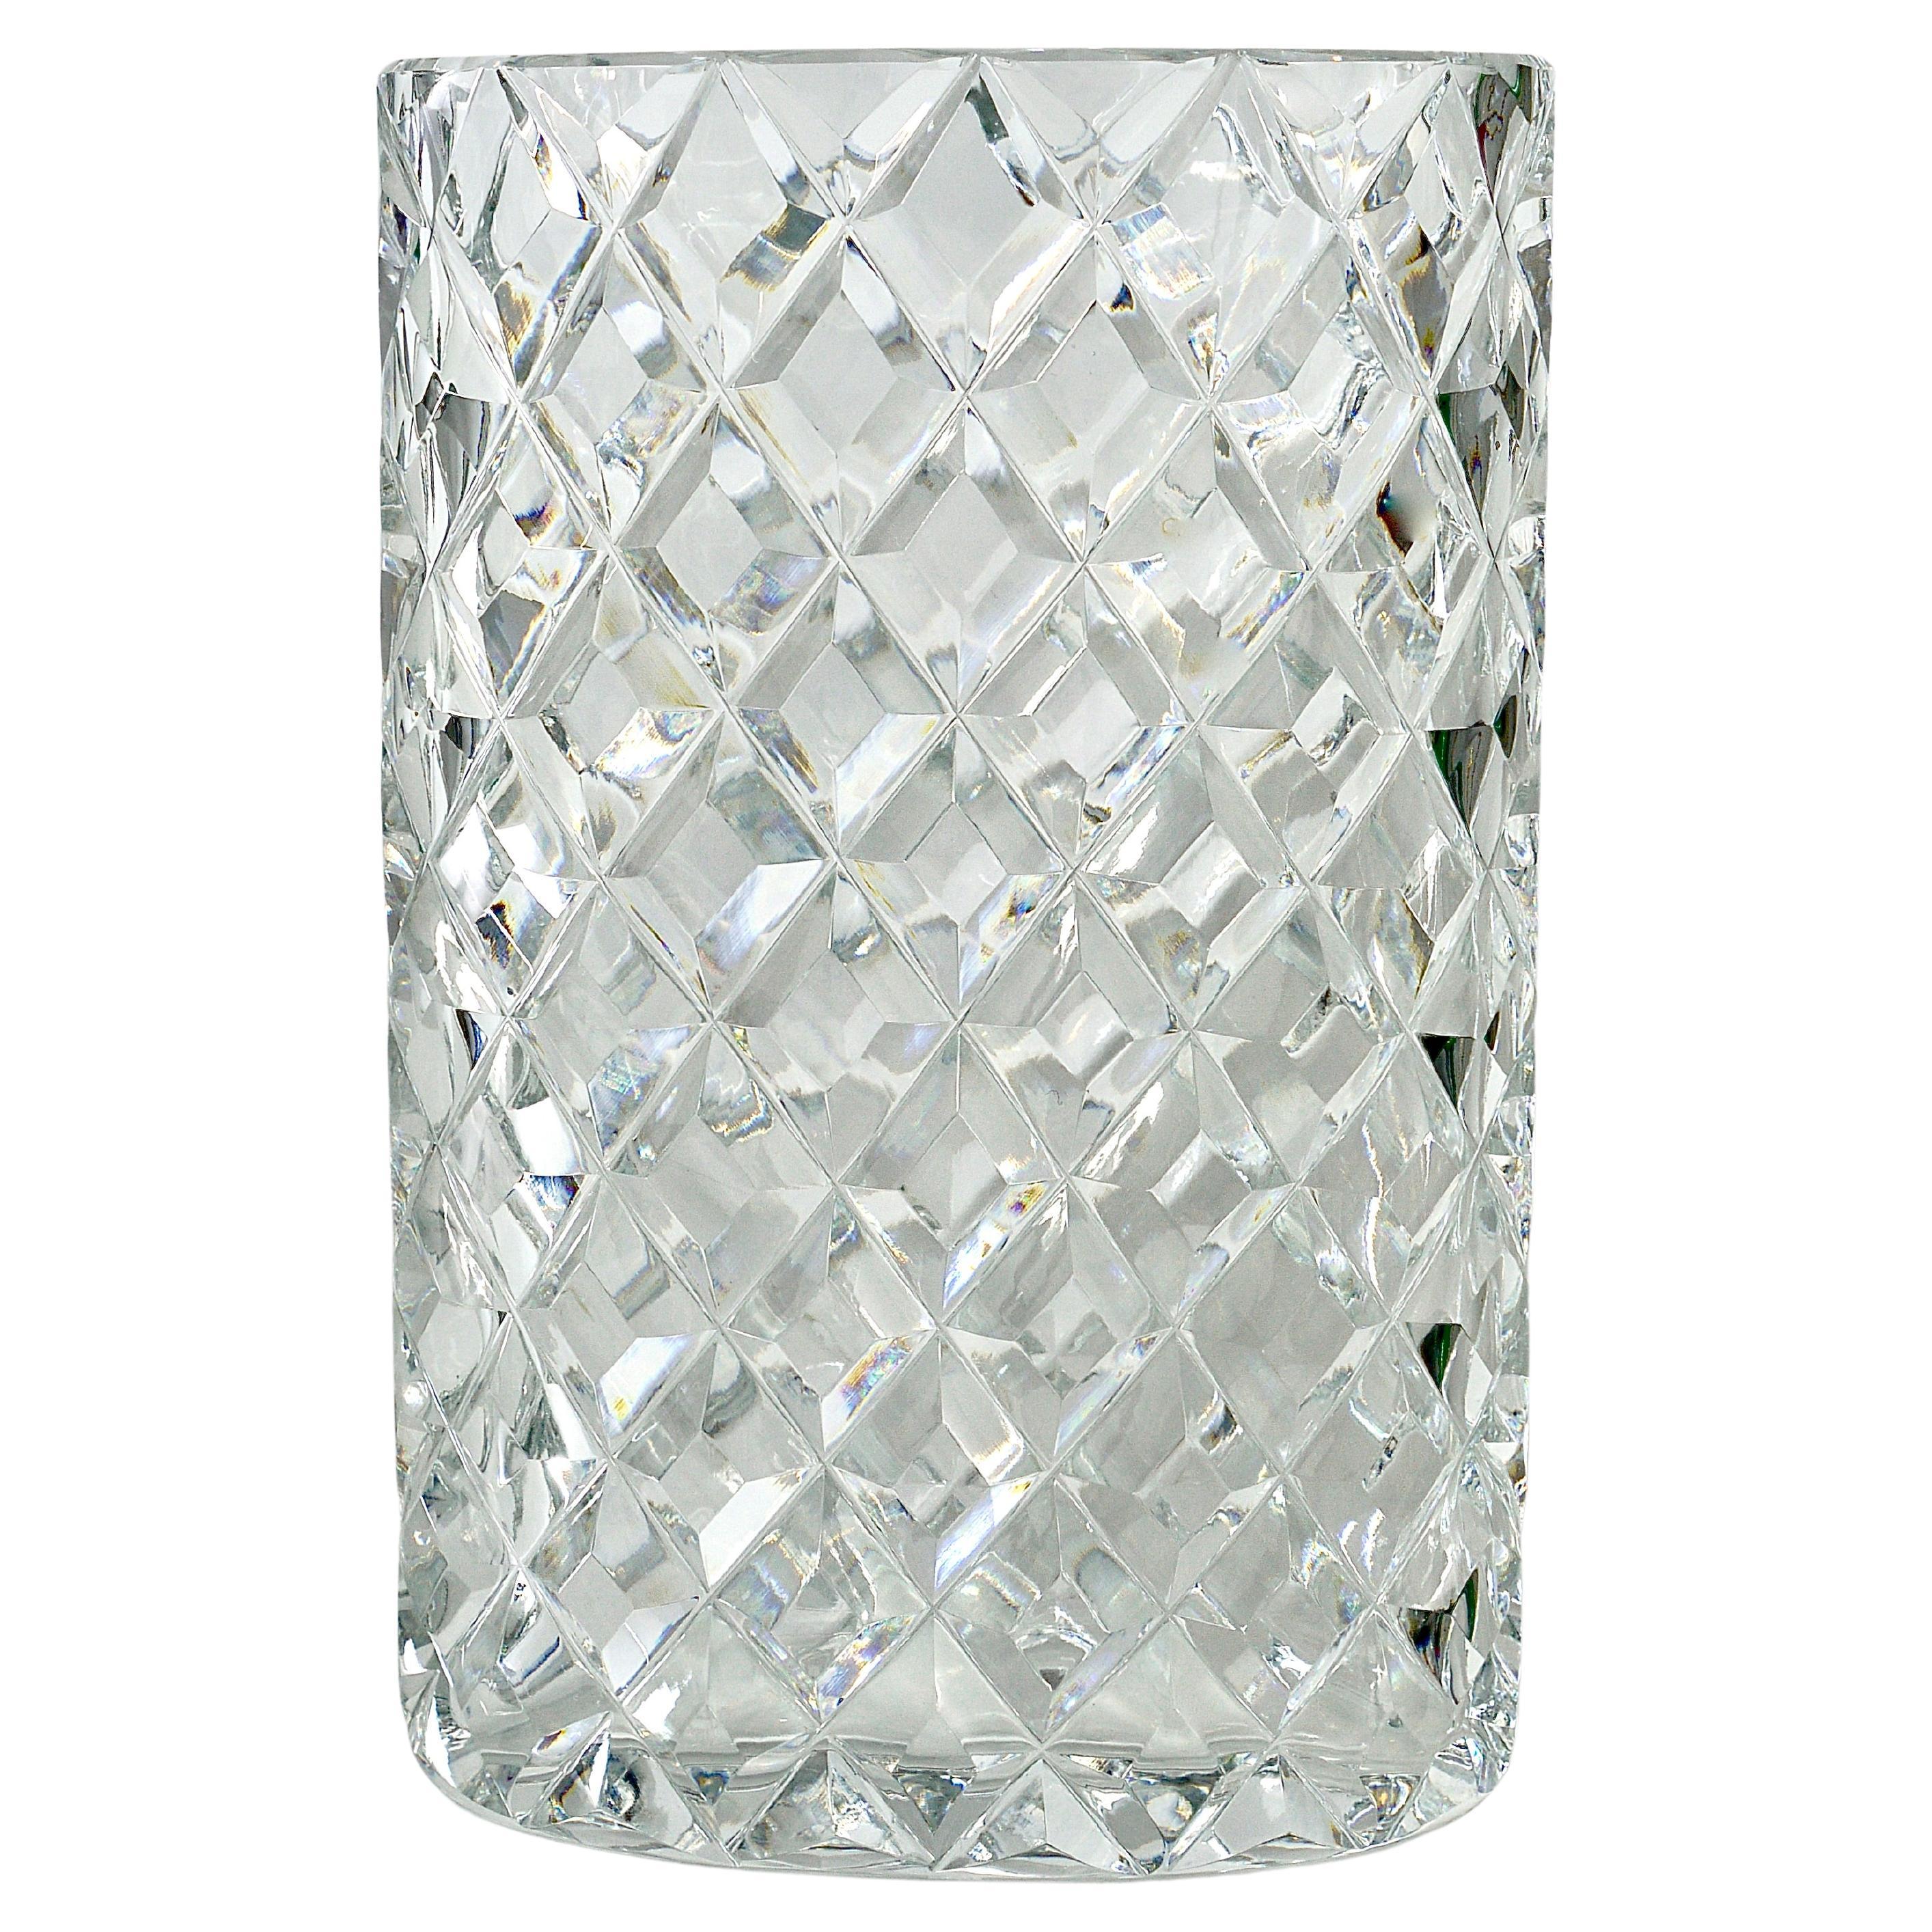 Sparkling Facetted Crystal Glass Vase by Claus Josef Riedel, Austria, 1970s